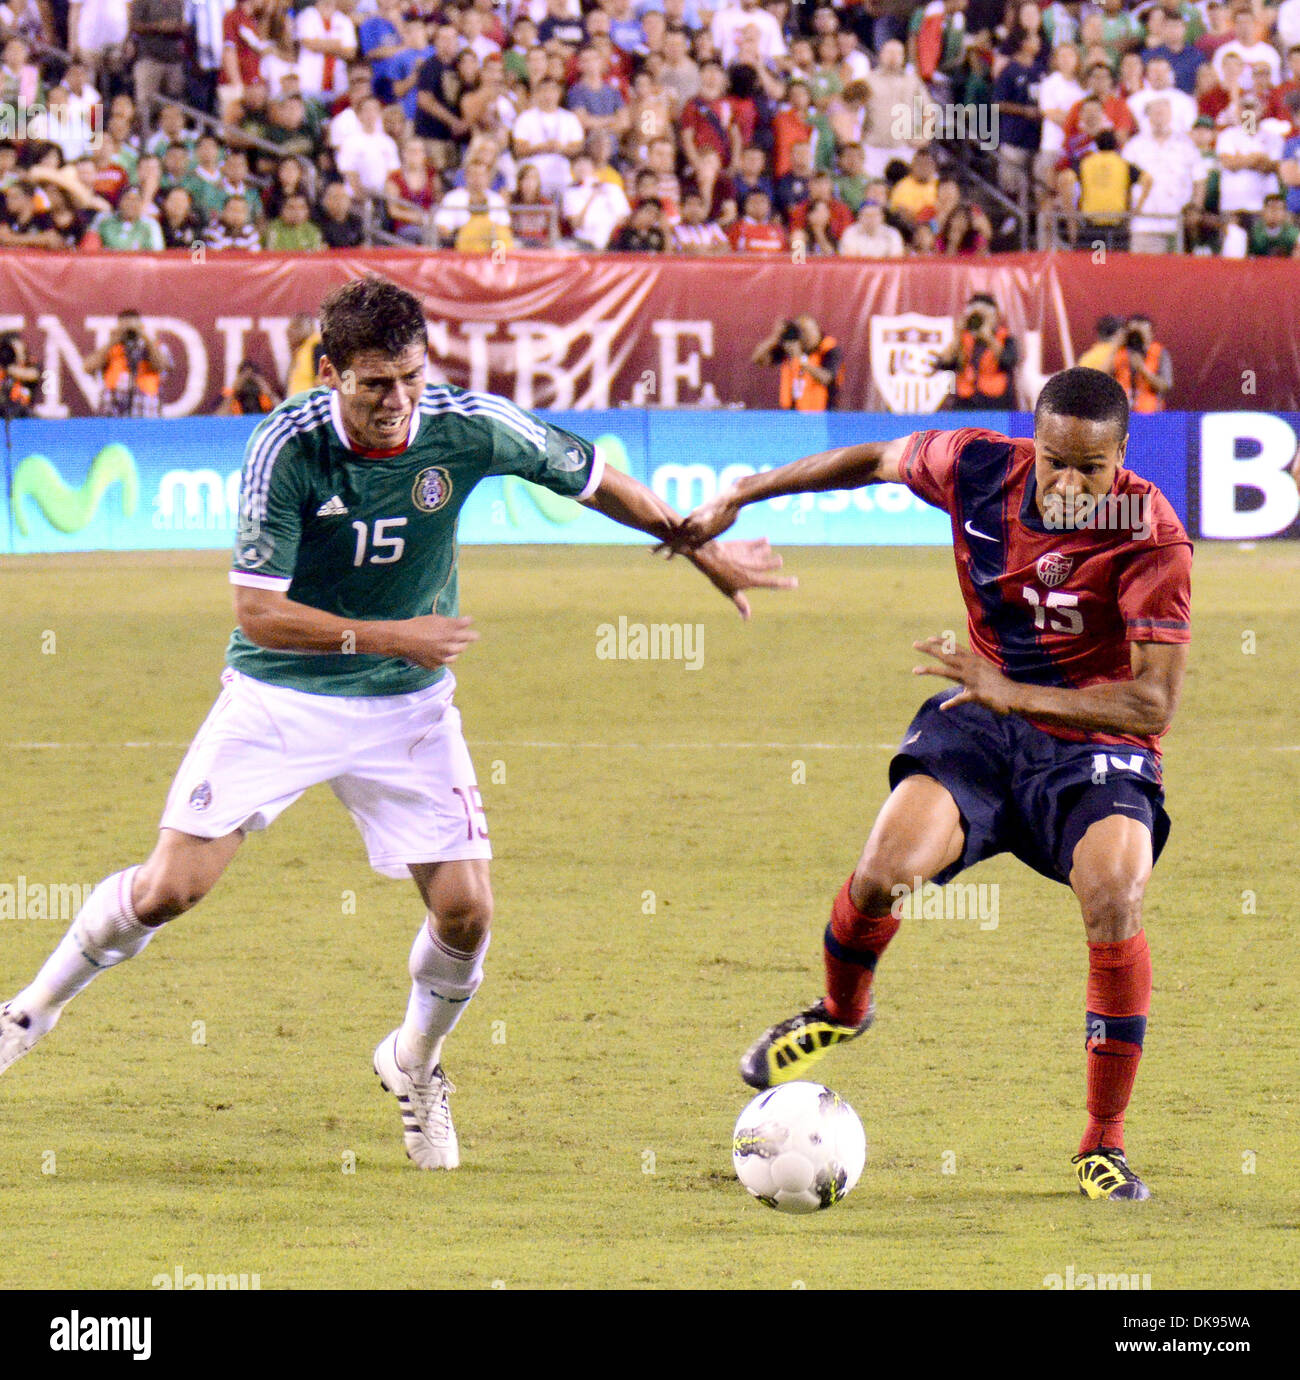 Aug. 10, 2011 - Philadelphia, PA, USA - US National Team player, RICARDO CLARK, fights fir the ball against Mexic player, HECTOR MORENO, during a friendly match with Mexico held at Lincoln Financial Field in Philadelphia Pa. (Credit Image: © Ricky Fitchett/ZUMAPRESS.com) Stock Photo